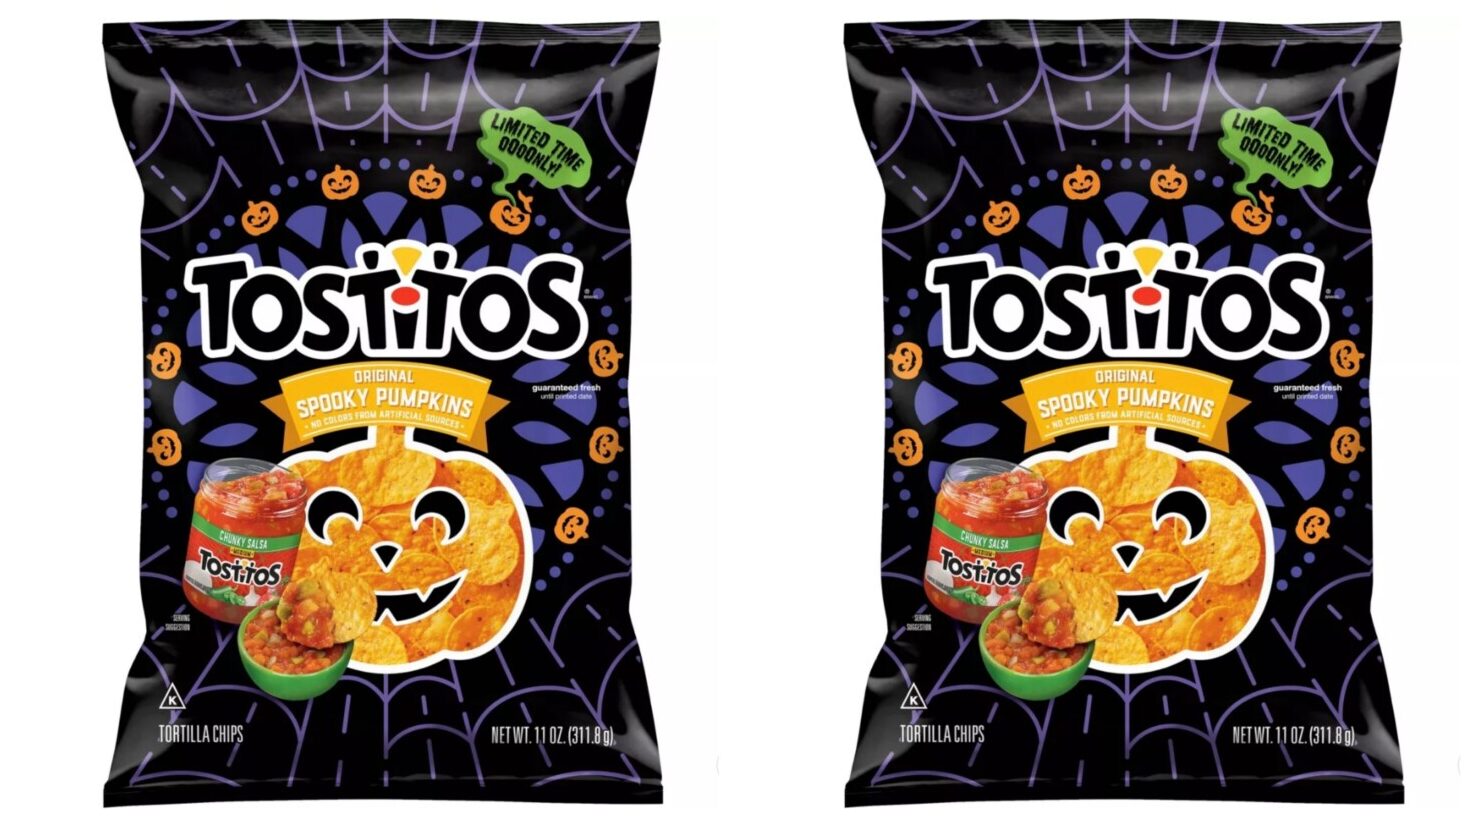 Bags of Tostitos pumpkin-shaped chips